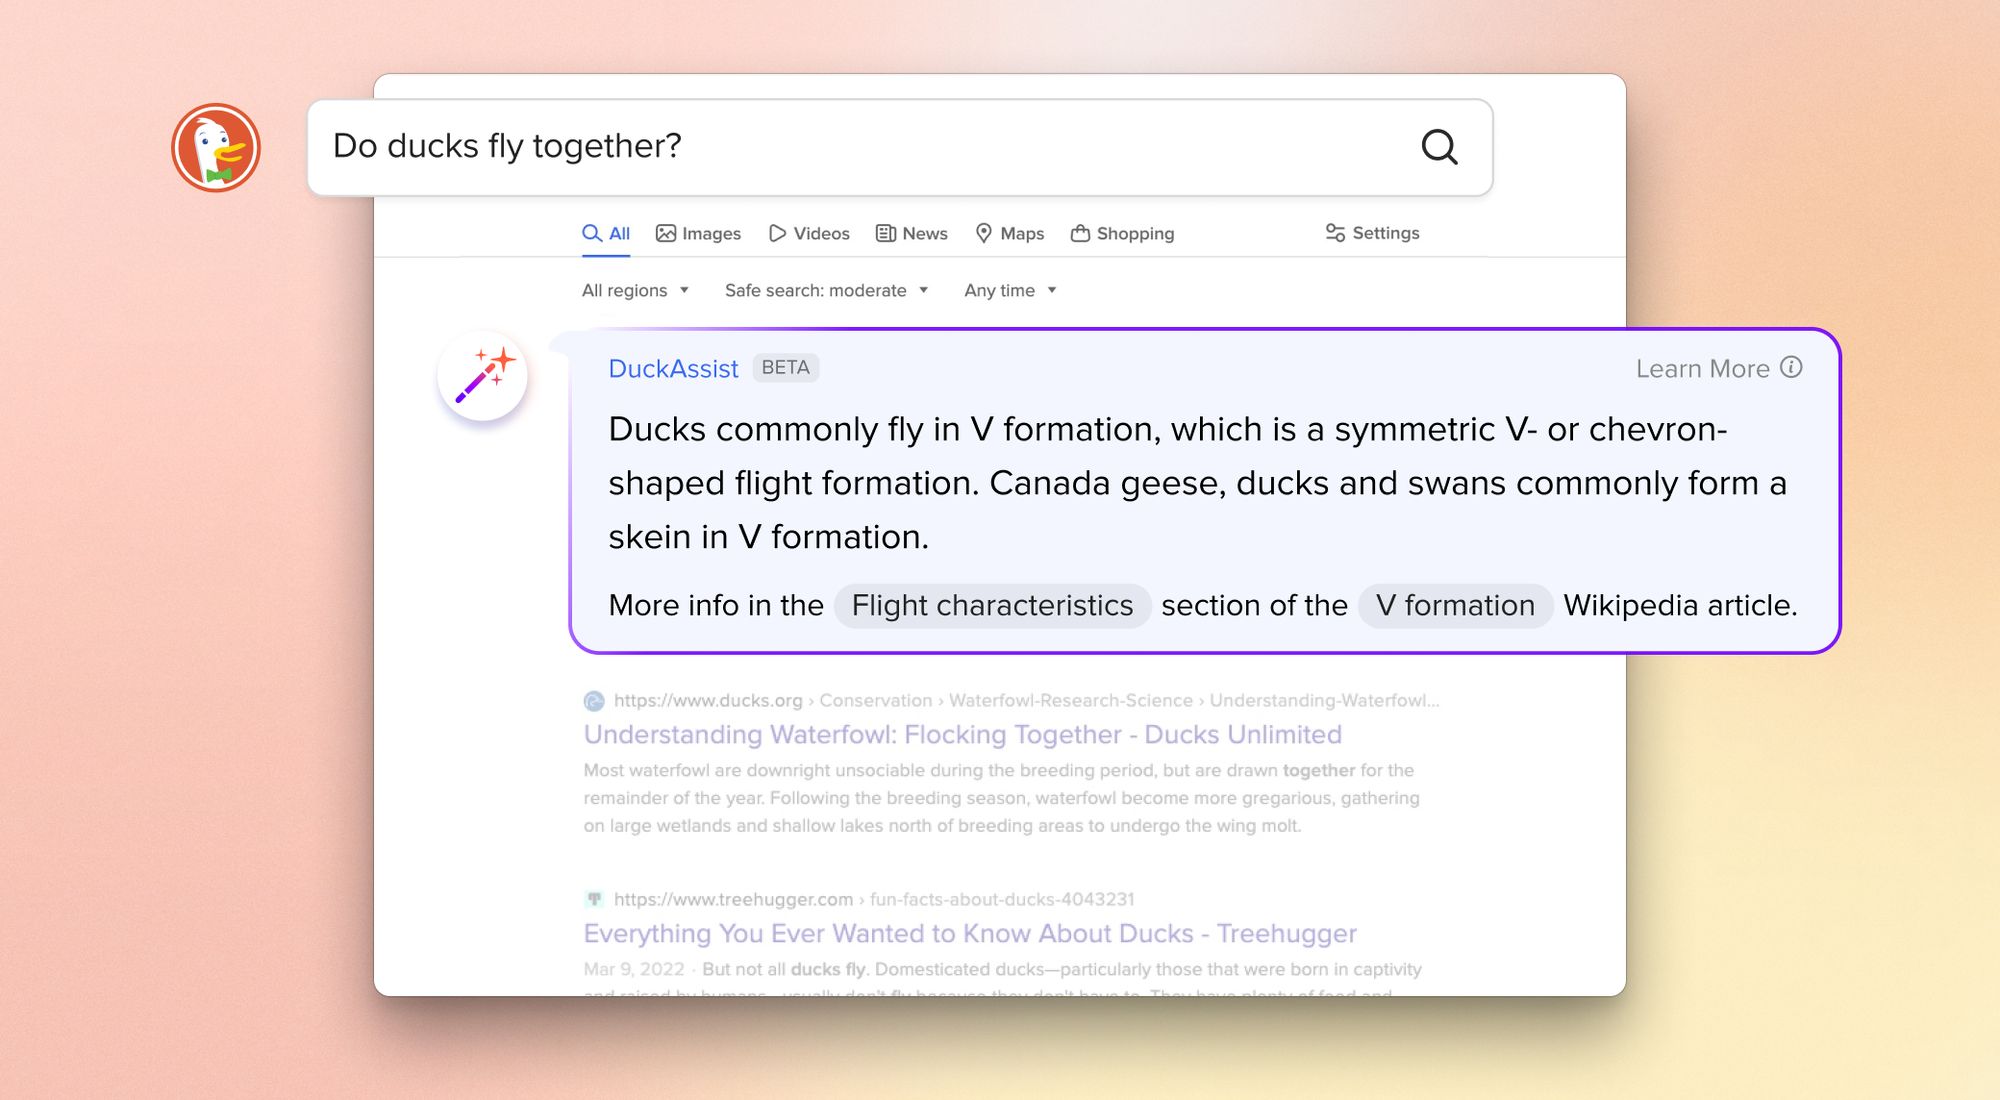 DuckDuckGo launches DuckAssist: a new feature that generates natural language answers to search queries using Wikipedia